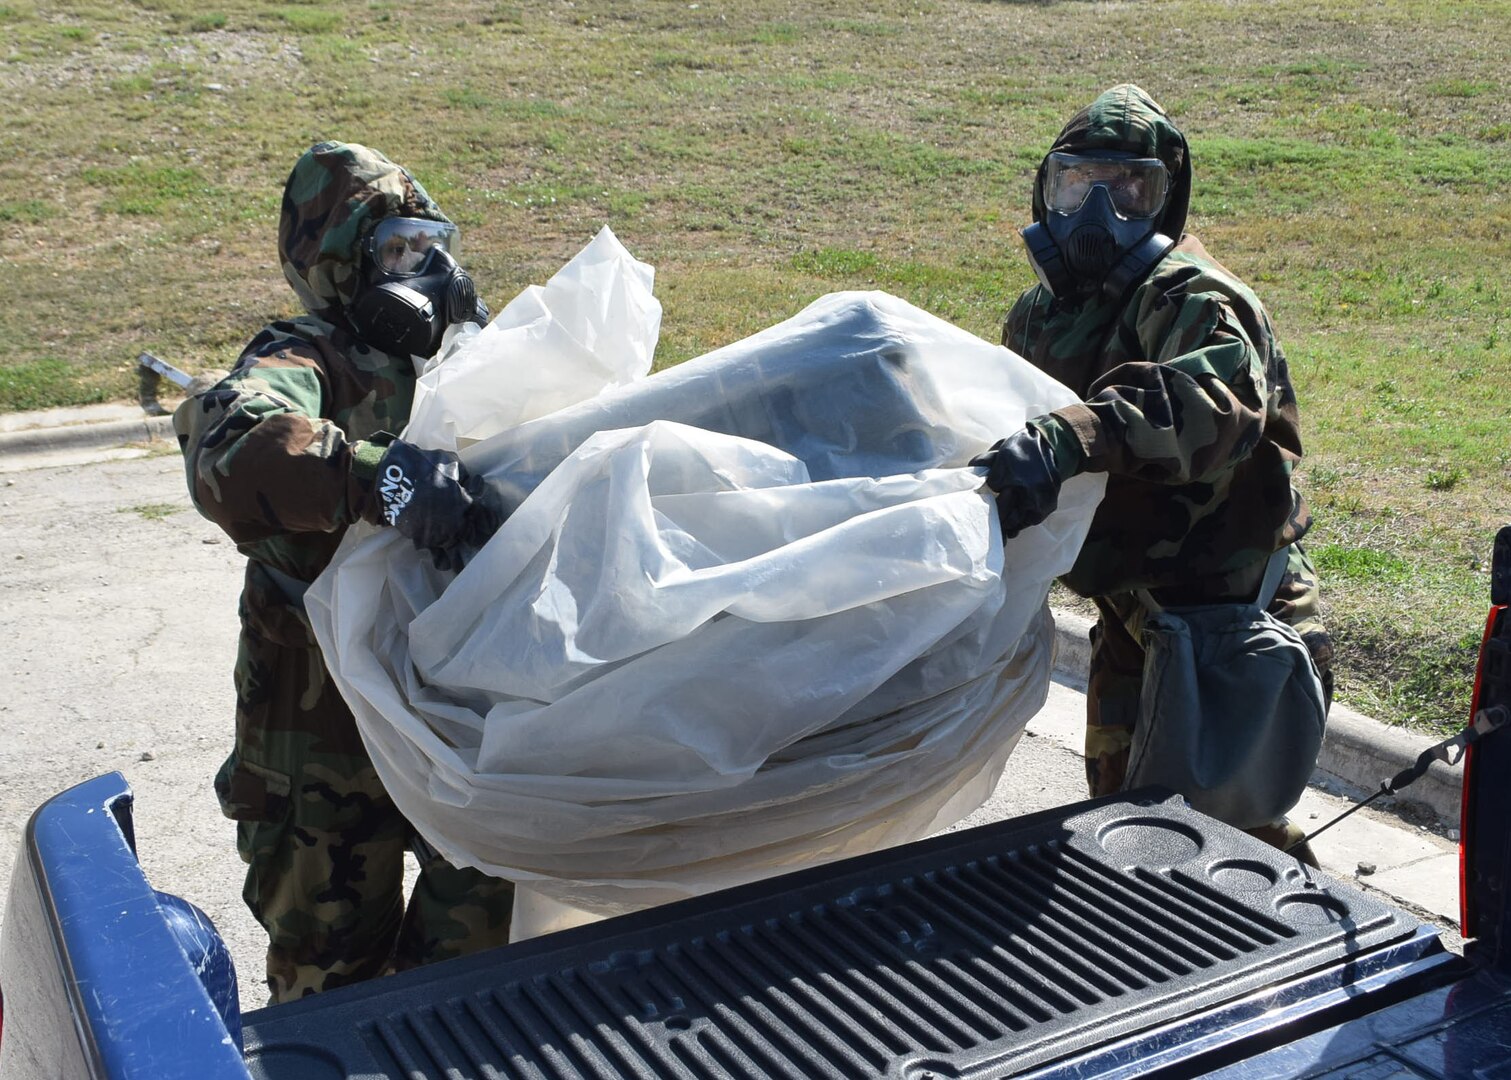 Senior Airman Jennifer Martinez and Senior Airman Ashley Garcia, 433rd Force Support Squadron, load a container onto a truck for transport during a field training exercise, April 10, 2021, at Joint Base San Antonio-Lackland, Texas. The exercise provided Reserve Citizen Airmen familiarity with real-world scenarios they could face in a deployed environment or at home. (U.S. Air Force photo by Tech. Sgt. Mike Lahrman)